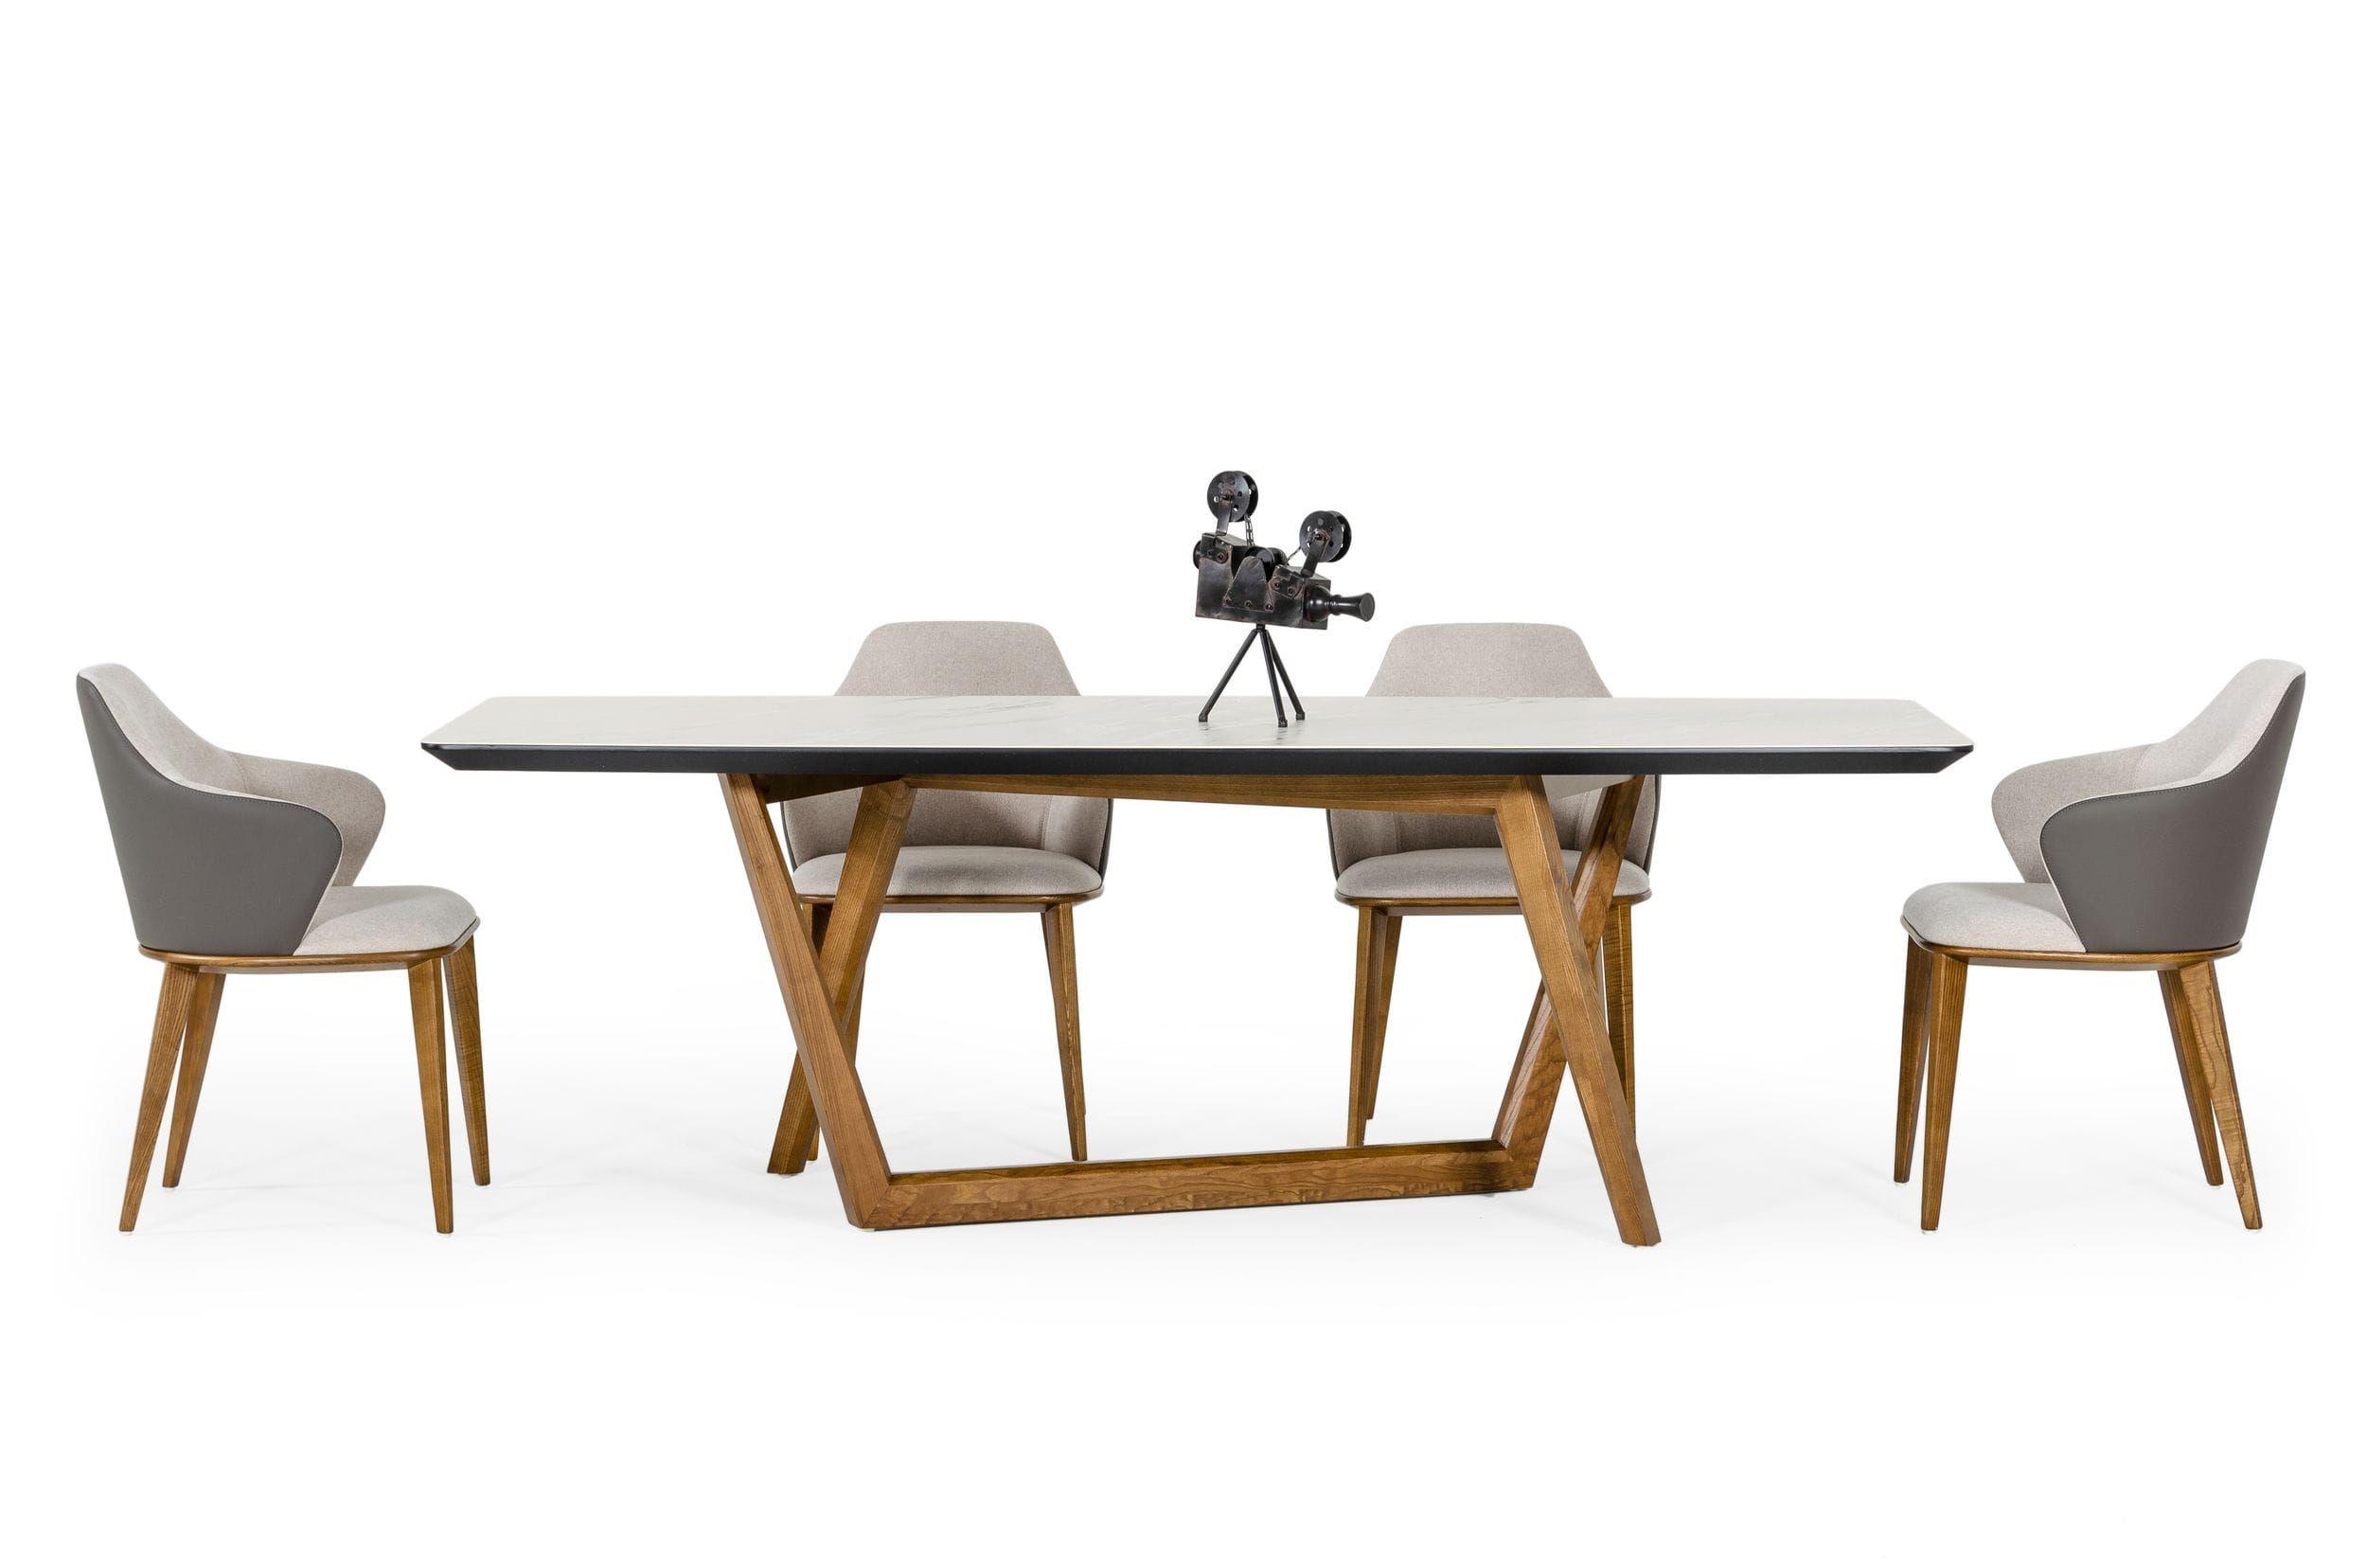 Contemporary, Modern Dining Room Set James Megan VGCSDT-19078-WAL-DT-9pcs in Walnut, Gray Leatherette